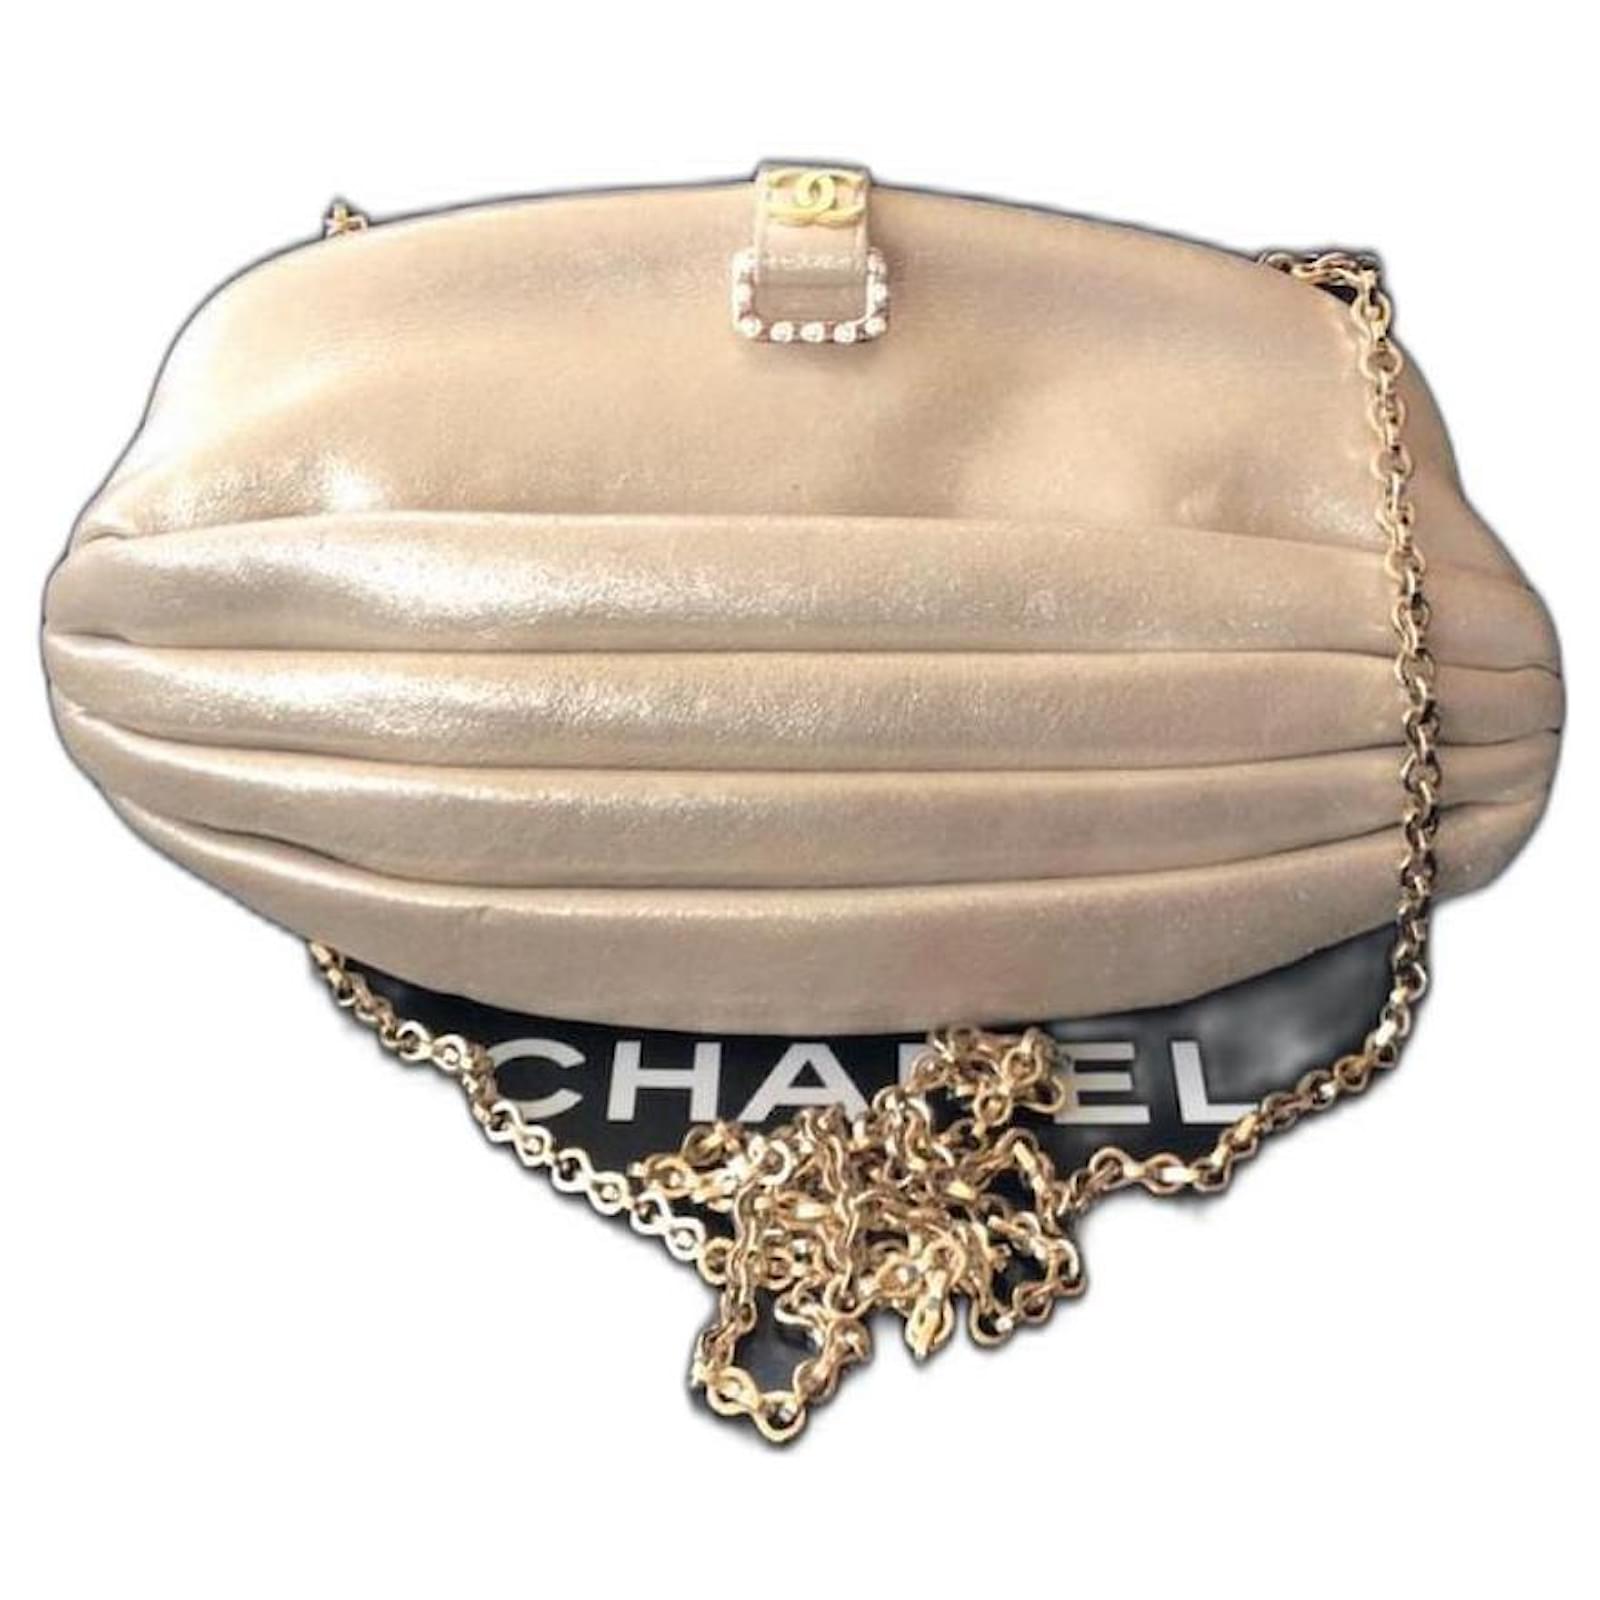 Timeless Chanel limited edition medium Clutch bag iridescent gold